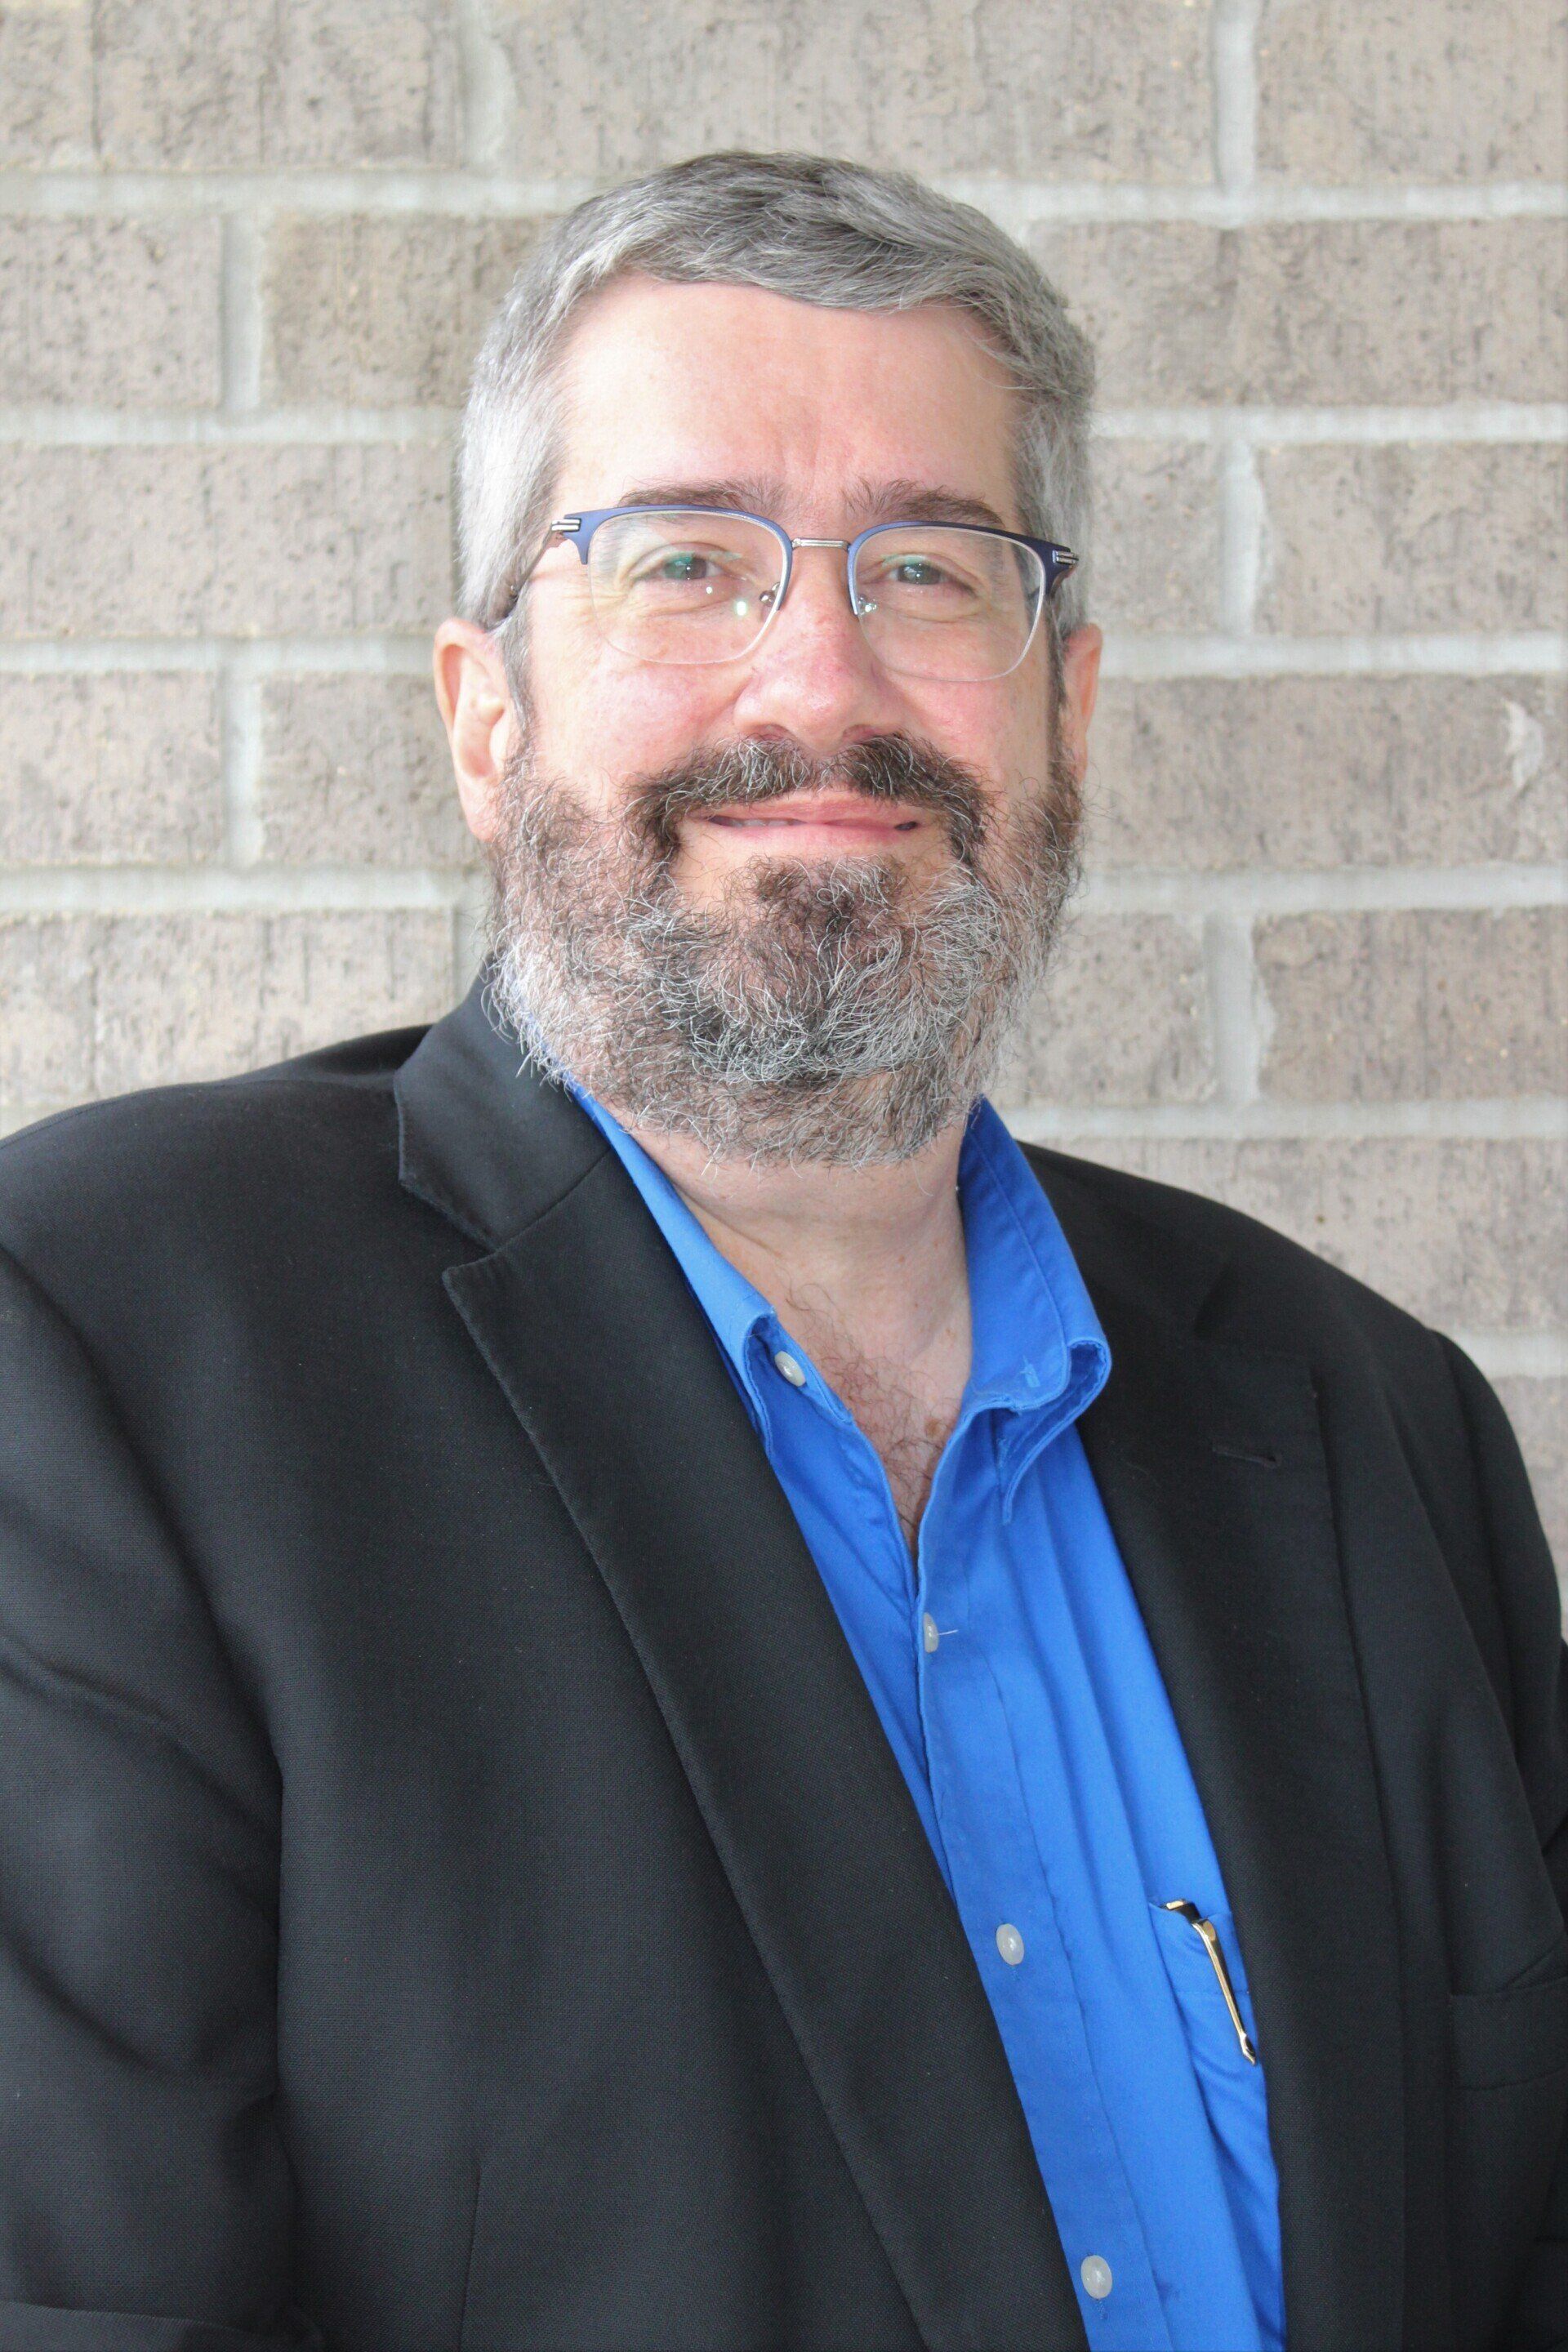 Lead Pastor Dan Dick, white man with salt-and-pepper hair and beard, wearing glasses and a blue shirt with black blazer